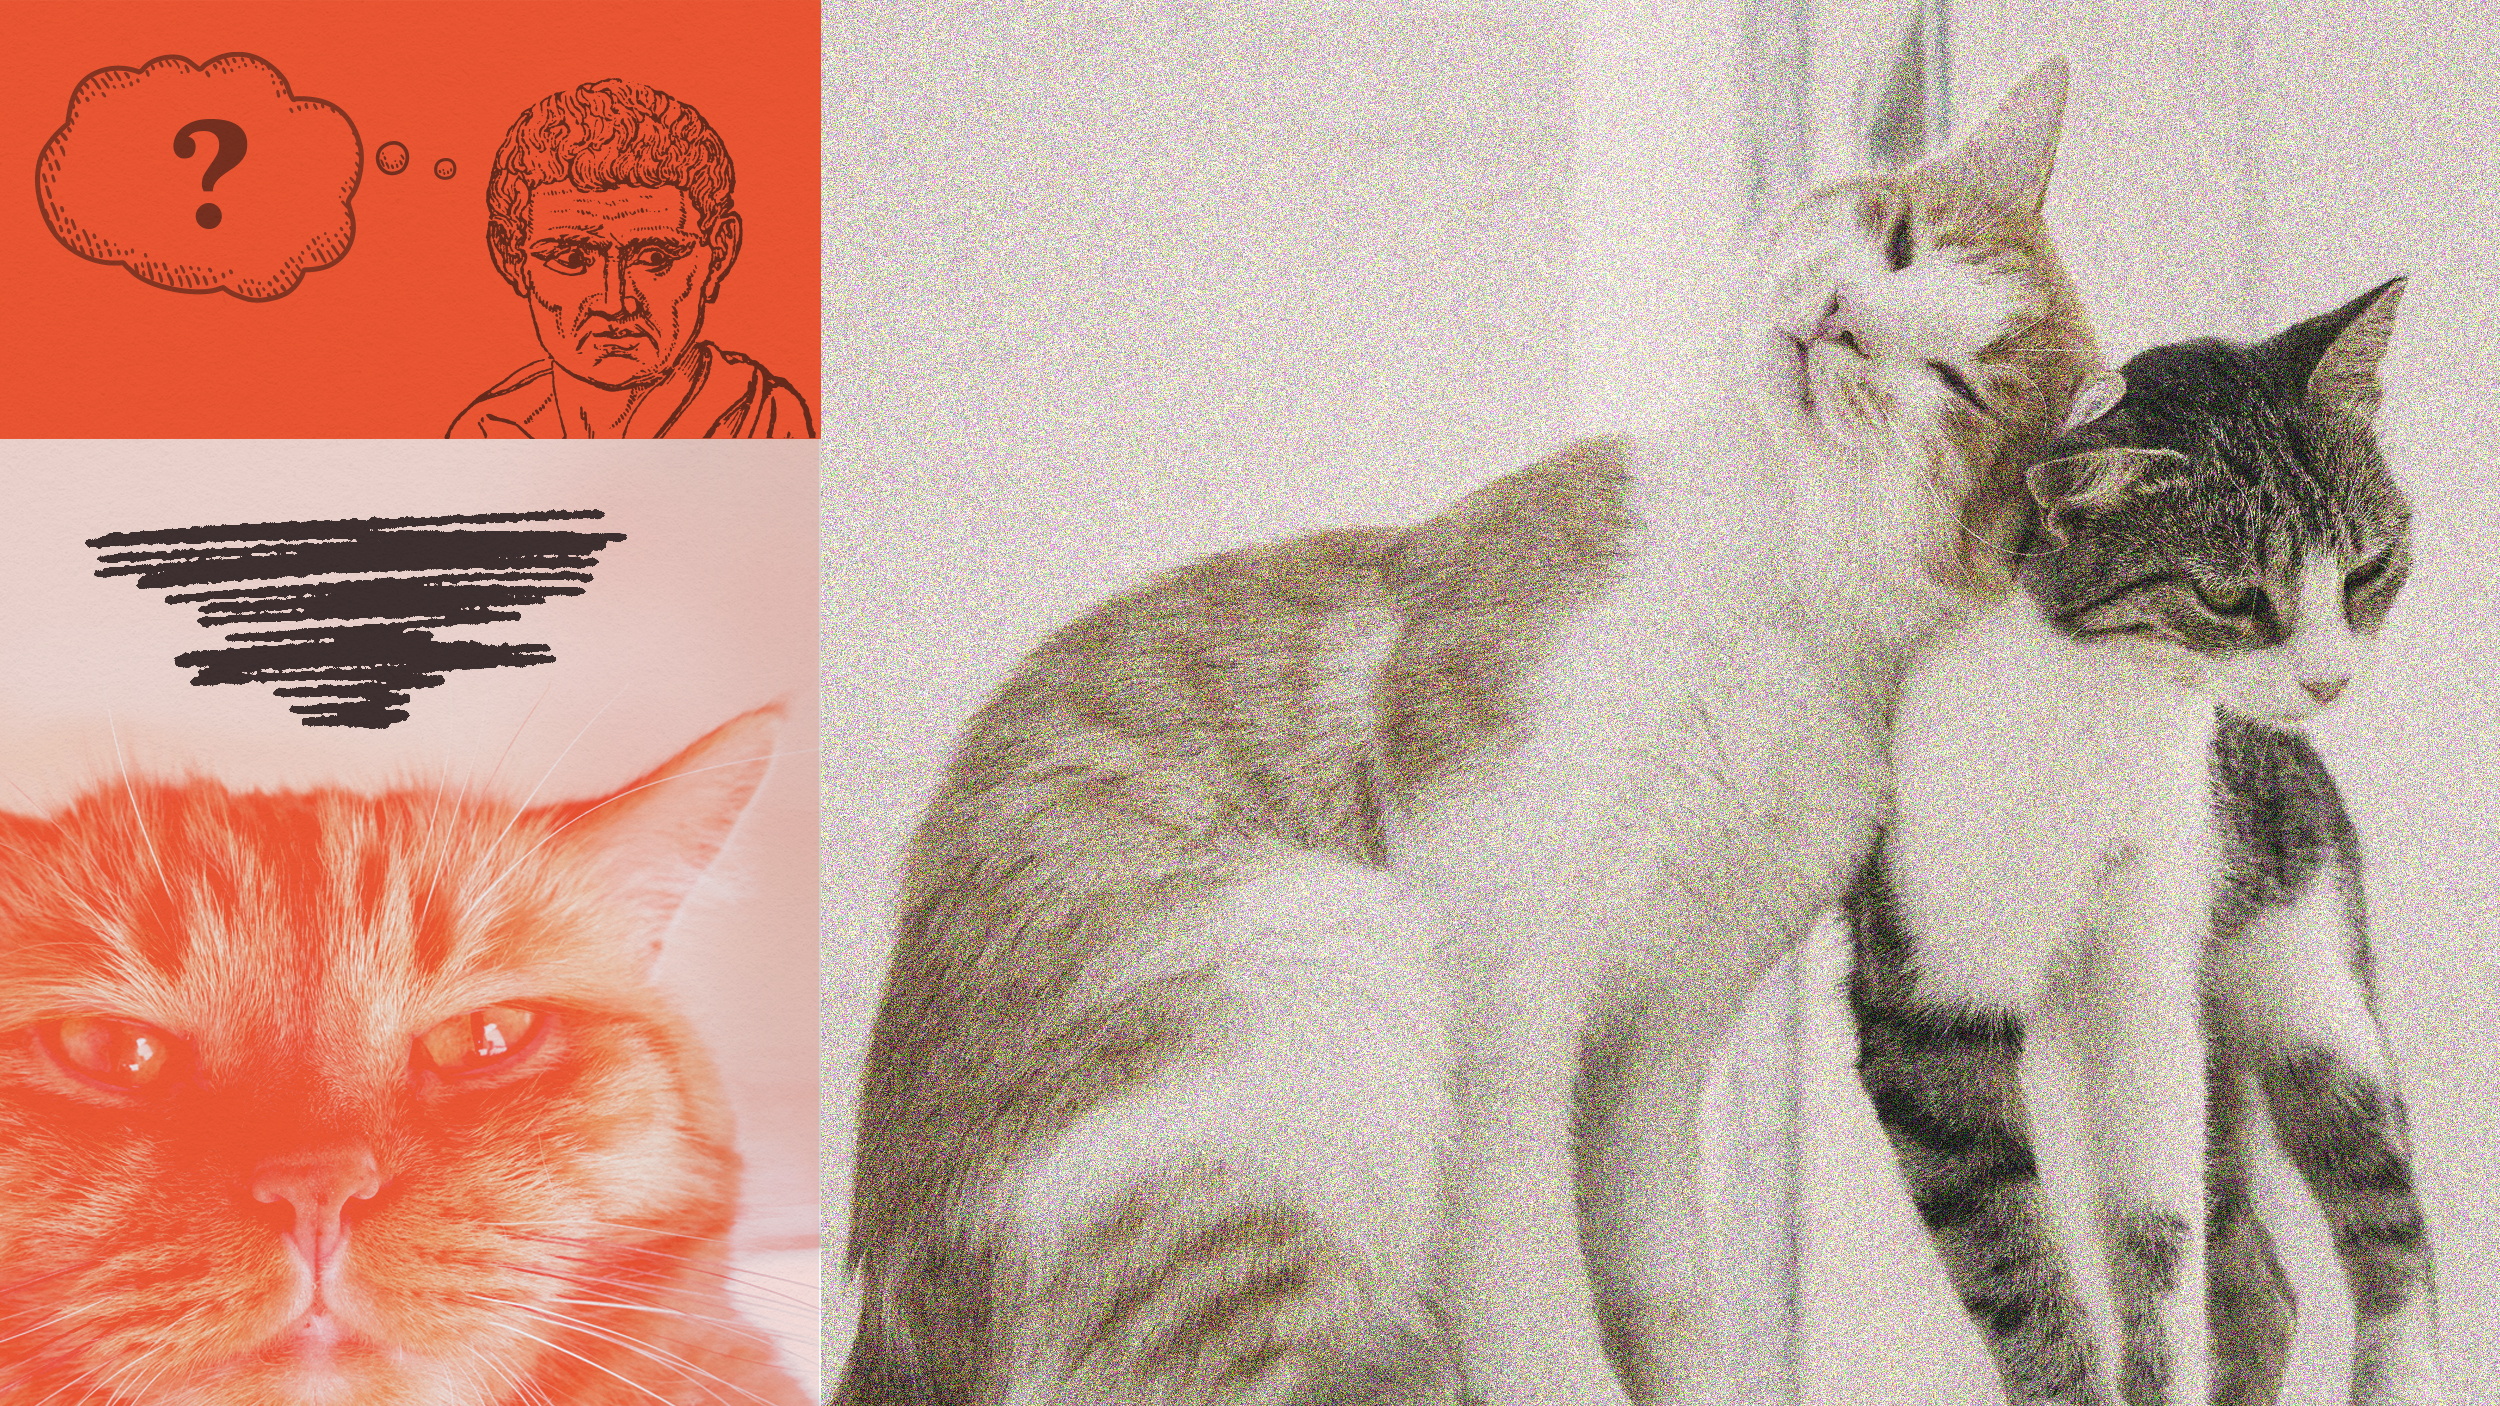 Collage featuring a thoughtful person contemplating dating philosophy, two embracing cats in monochrome, and a close-up of an orange cat's face, with graphic elements like a question mark and abstract lines.